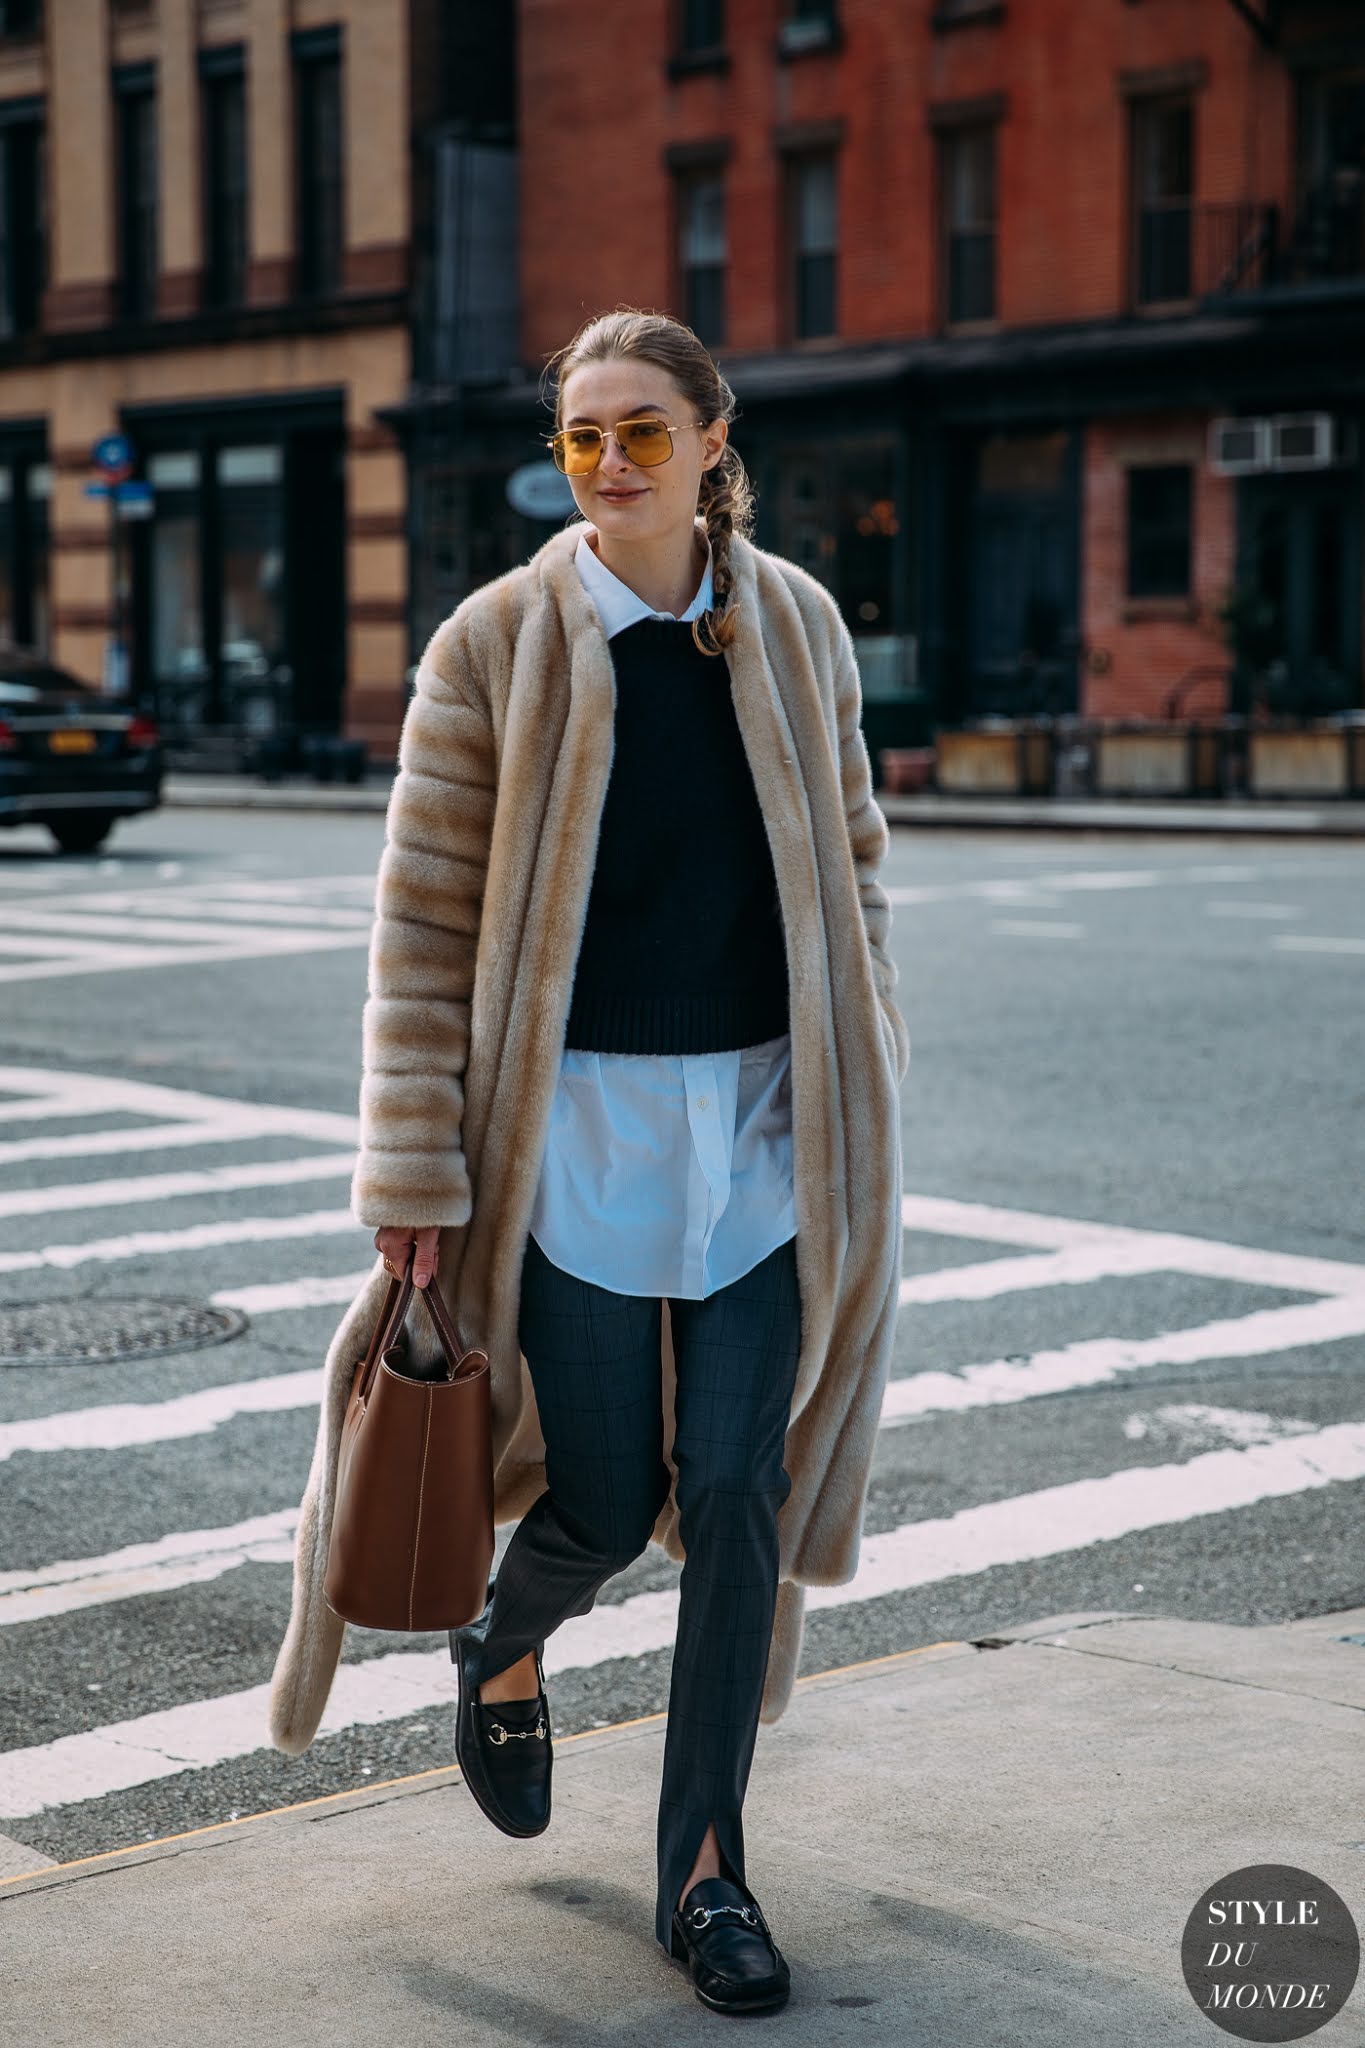 How to Wear Cargo Pants 21 Outfit Ideas for Girls  Women cargo pants outfit,  Jenna lyons style, Womens fashion chic